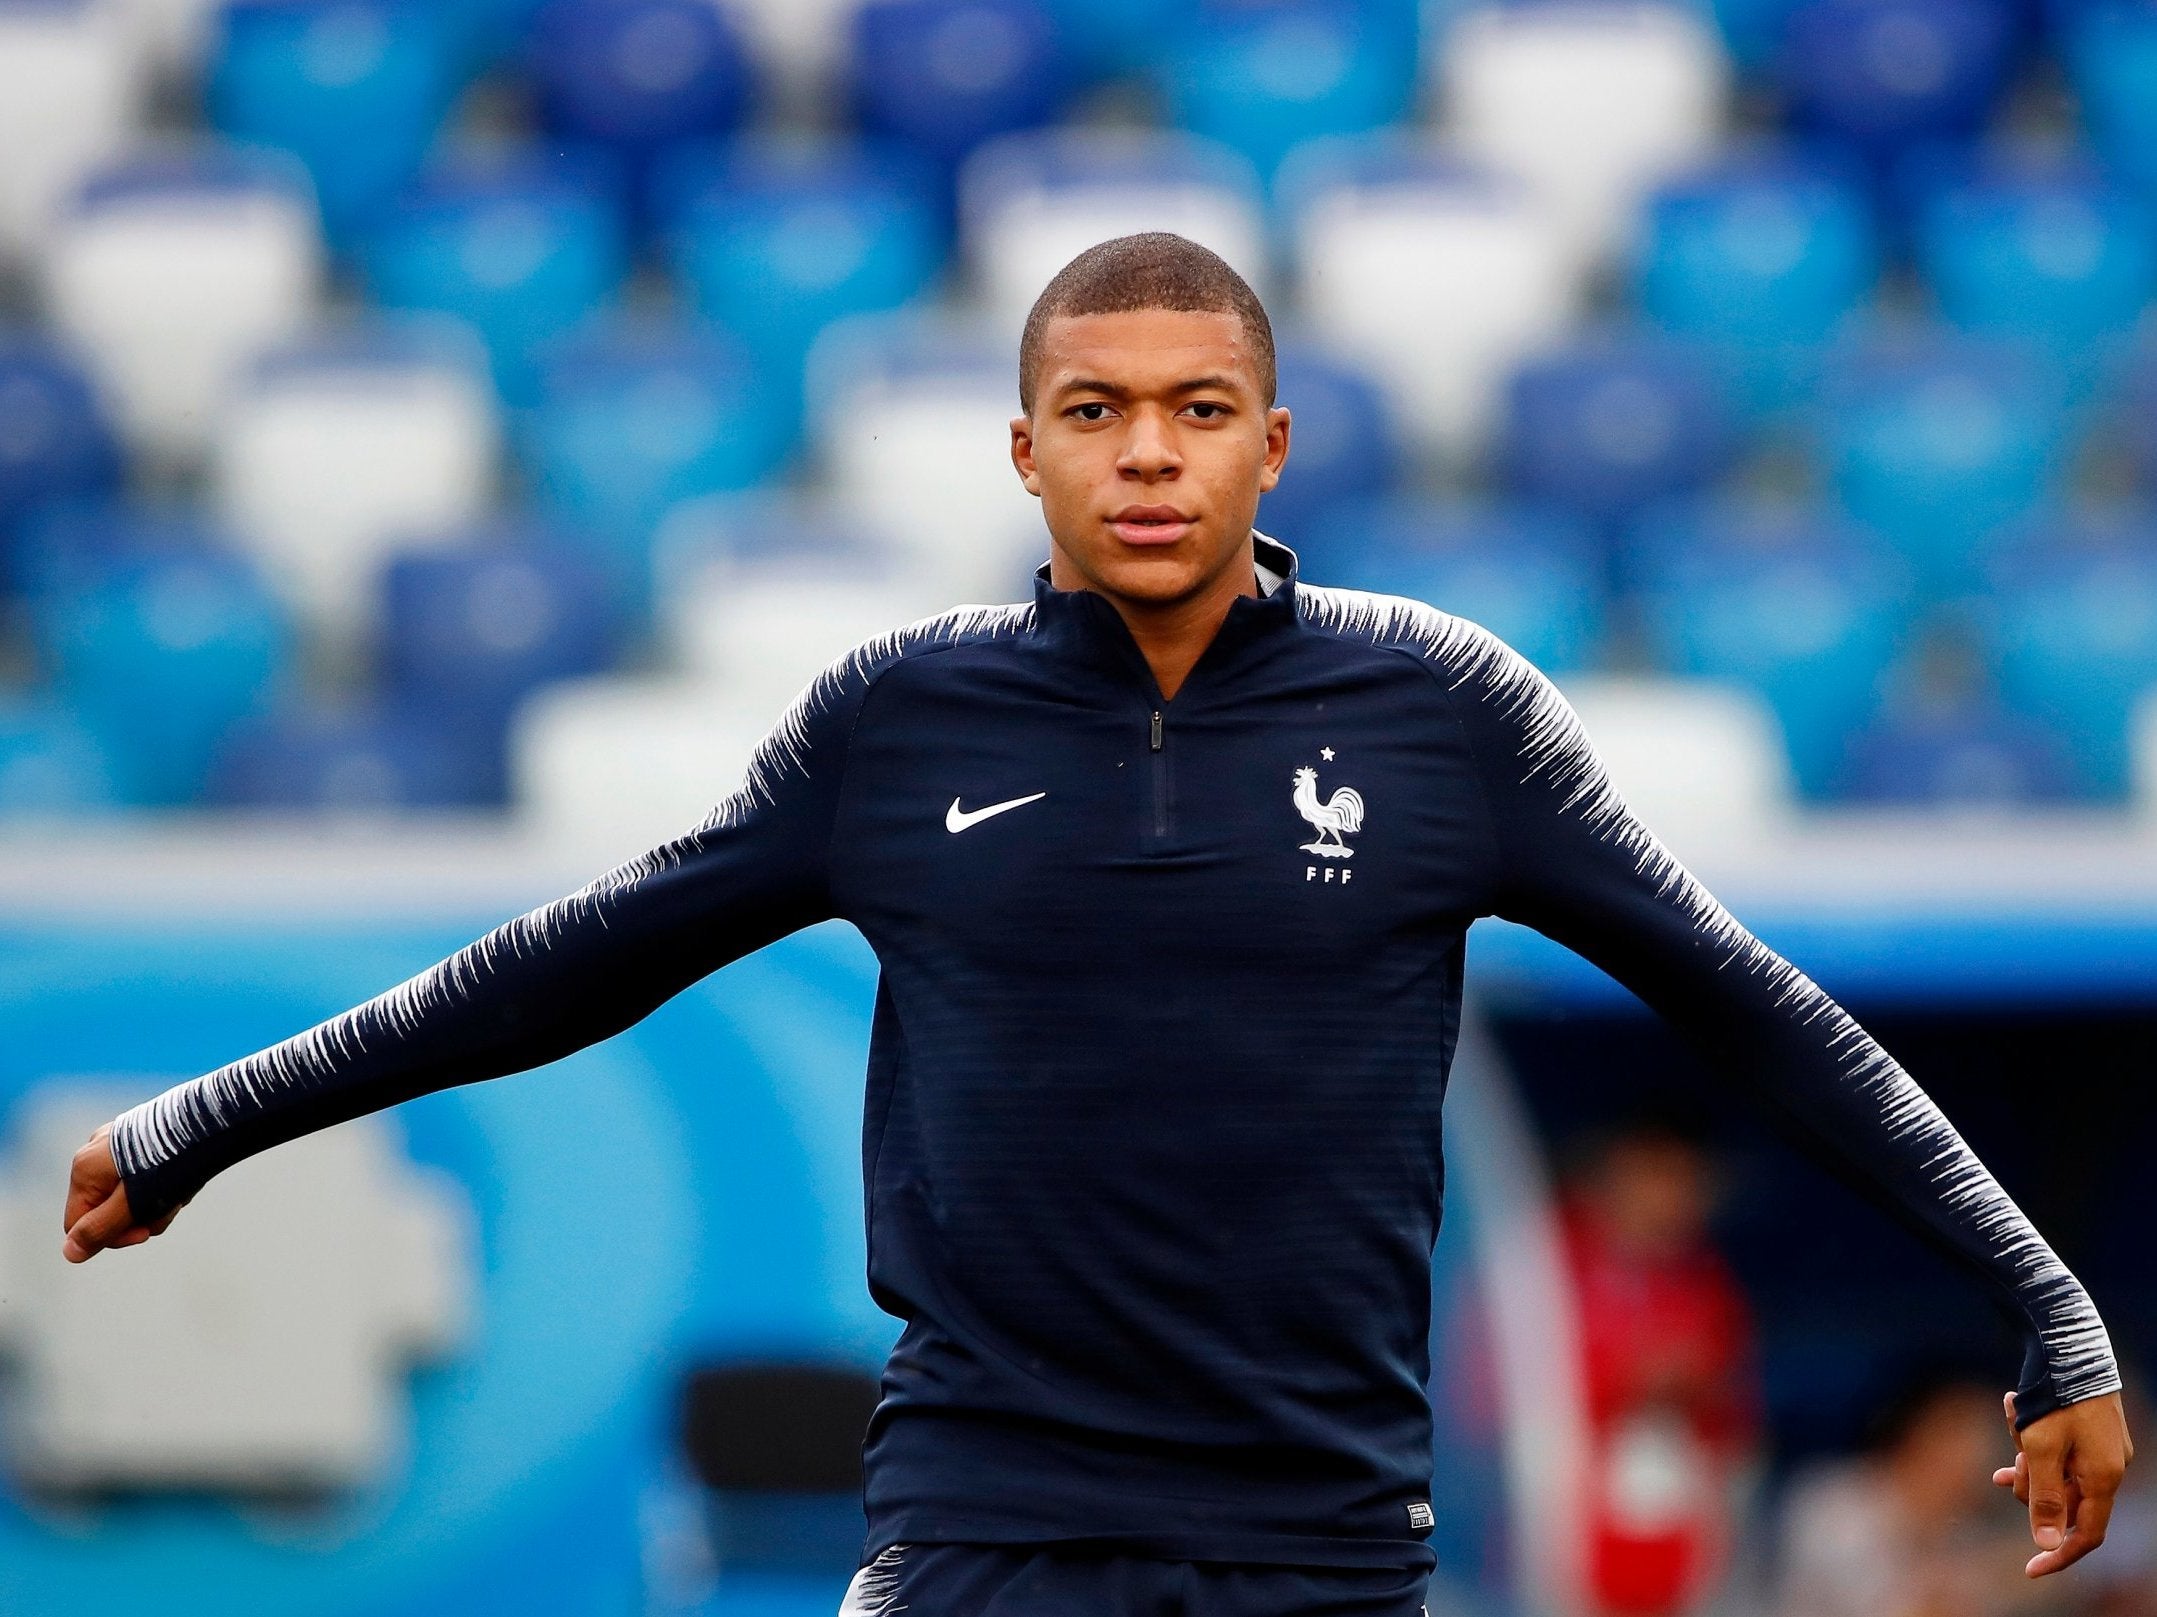 Legendary UCL winner reveals the only way Real Madrid can buy Mbappe